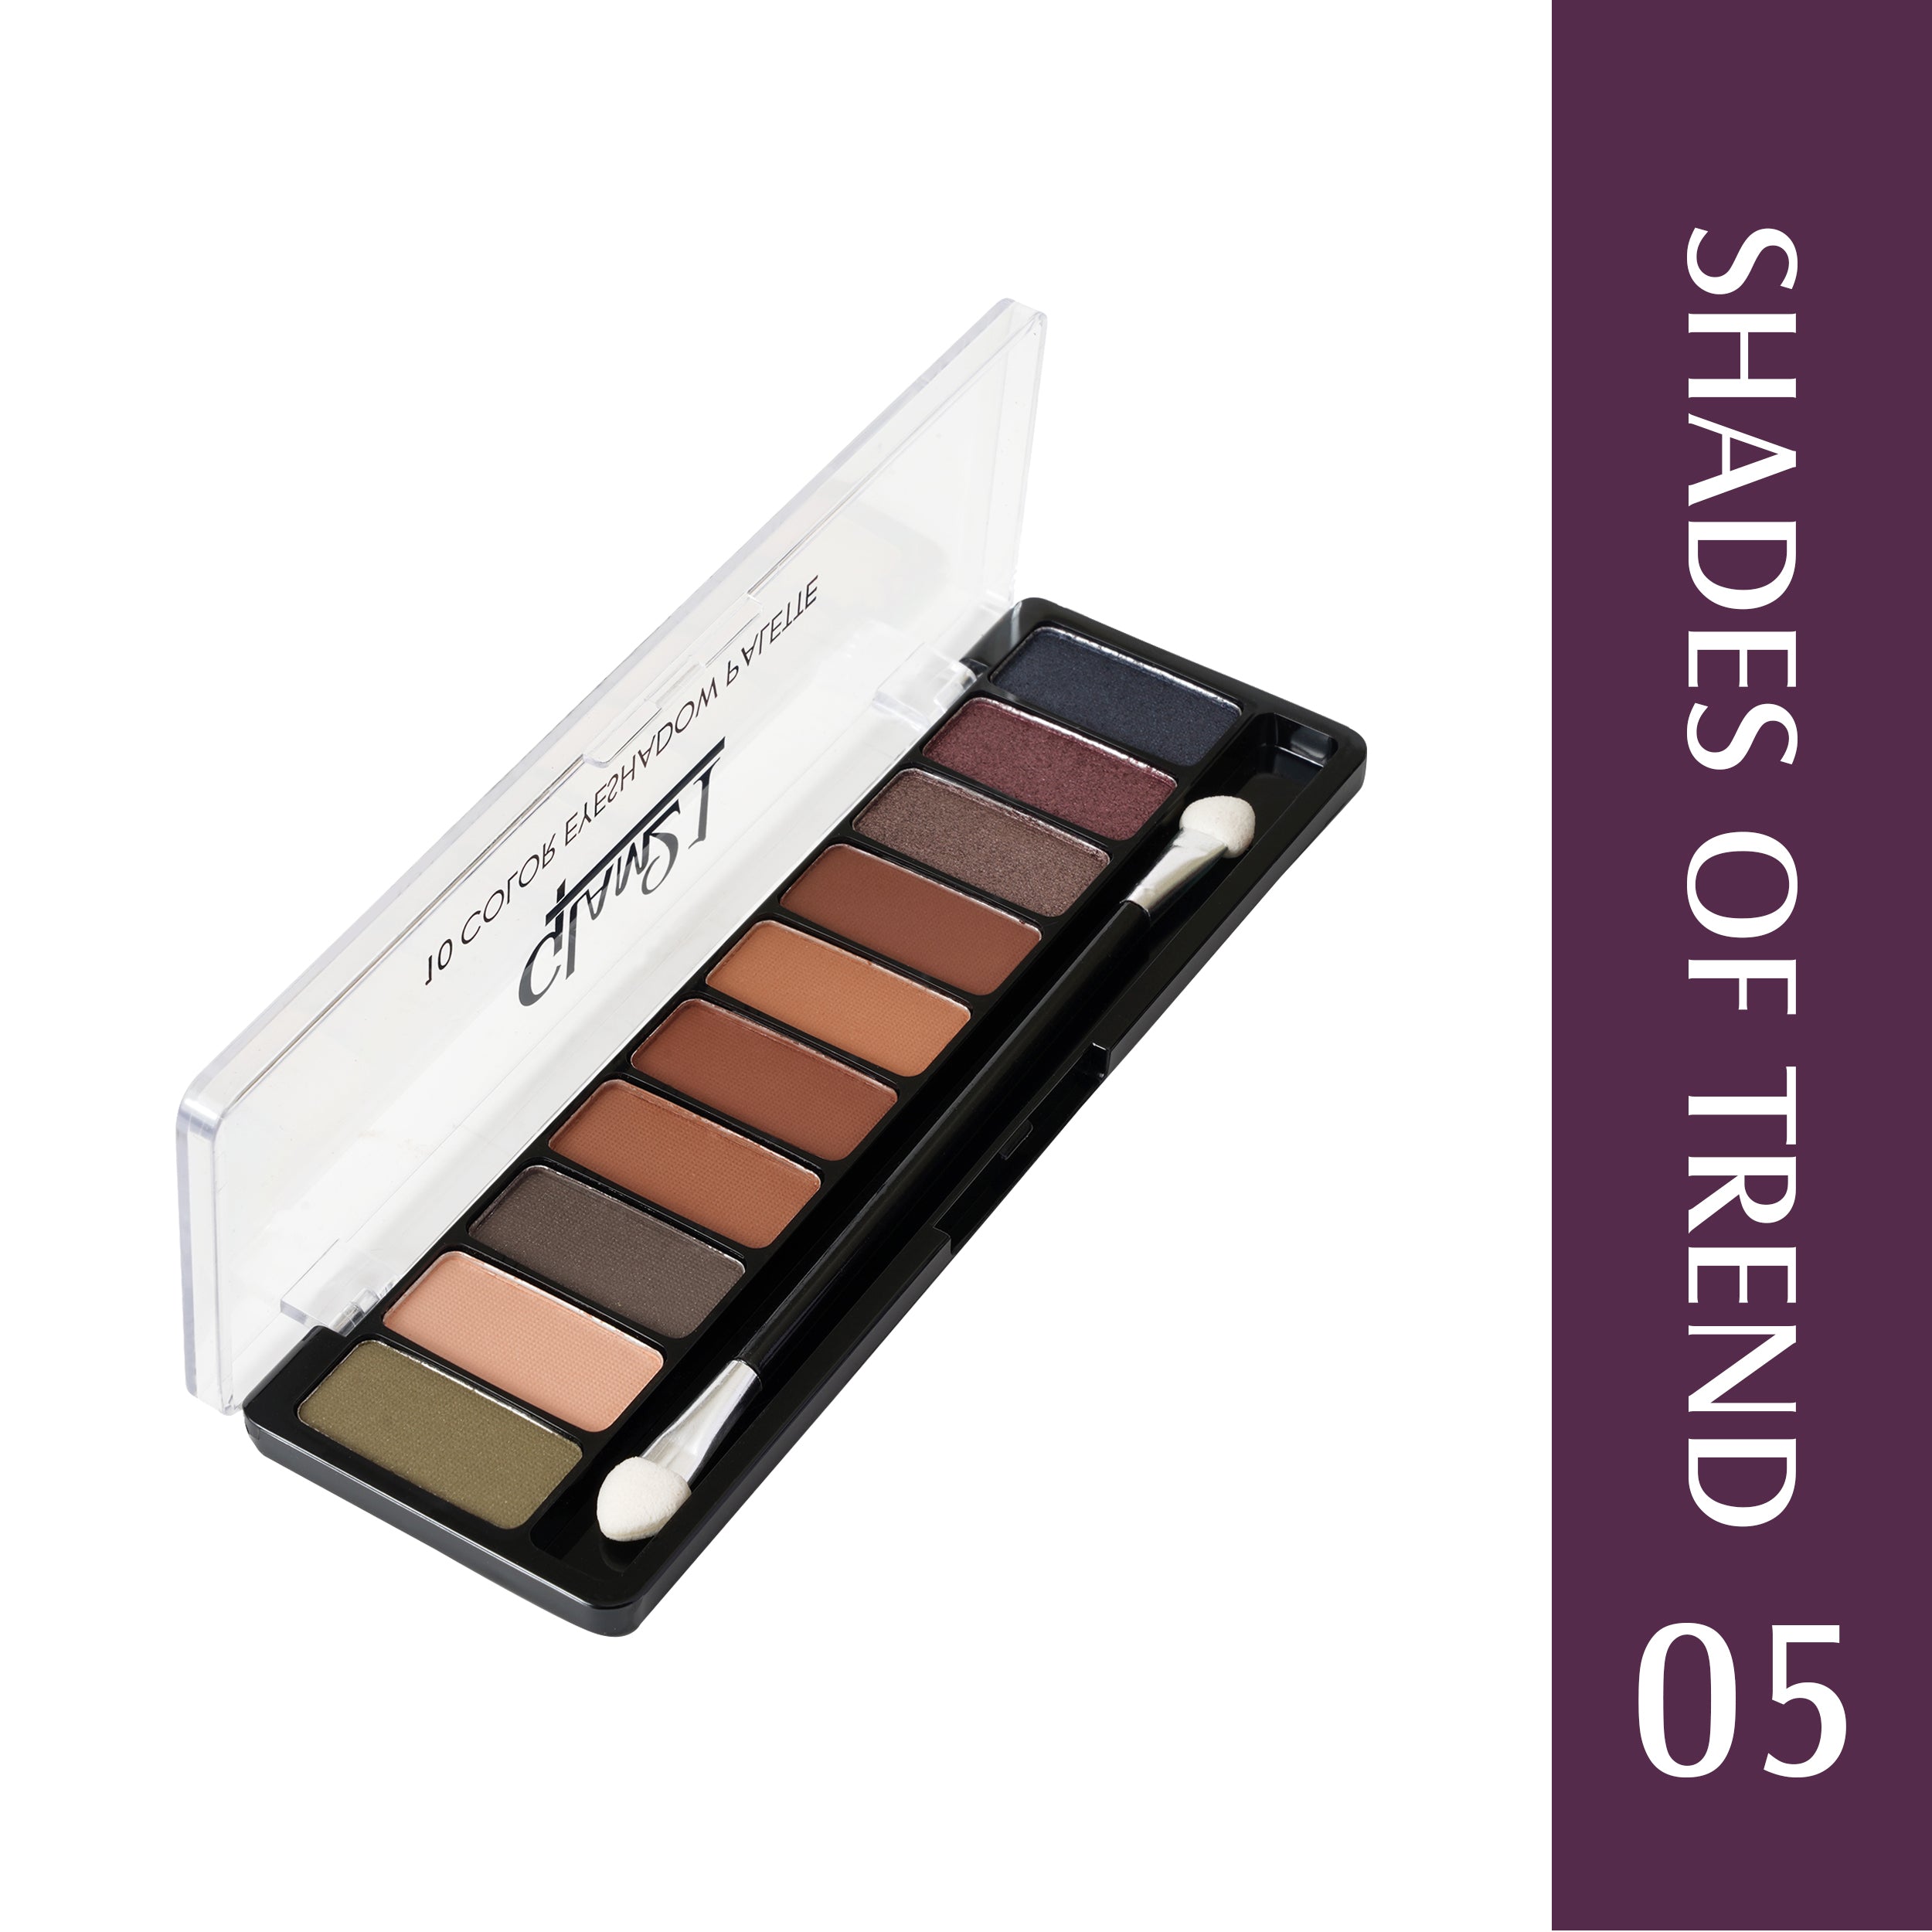 Glam21 10 Color Eyeshadow Palette - Soft Matte & Creamy Shimmer in Just One Swipe 13 g (Shade-05)